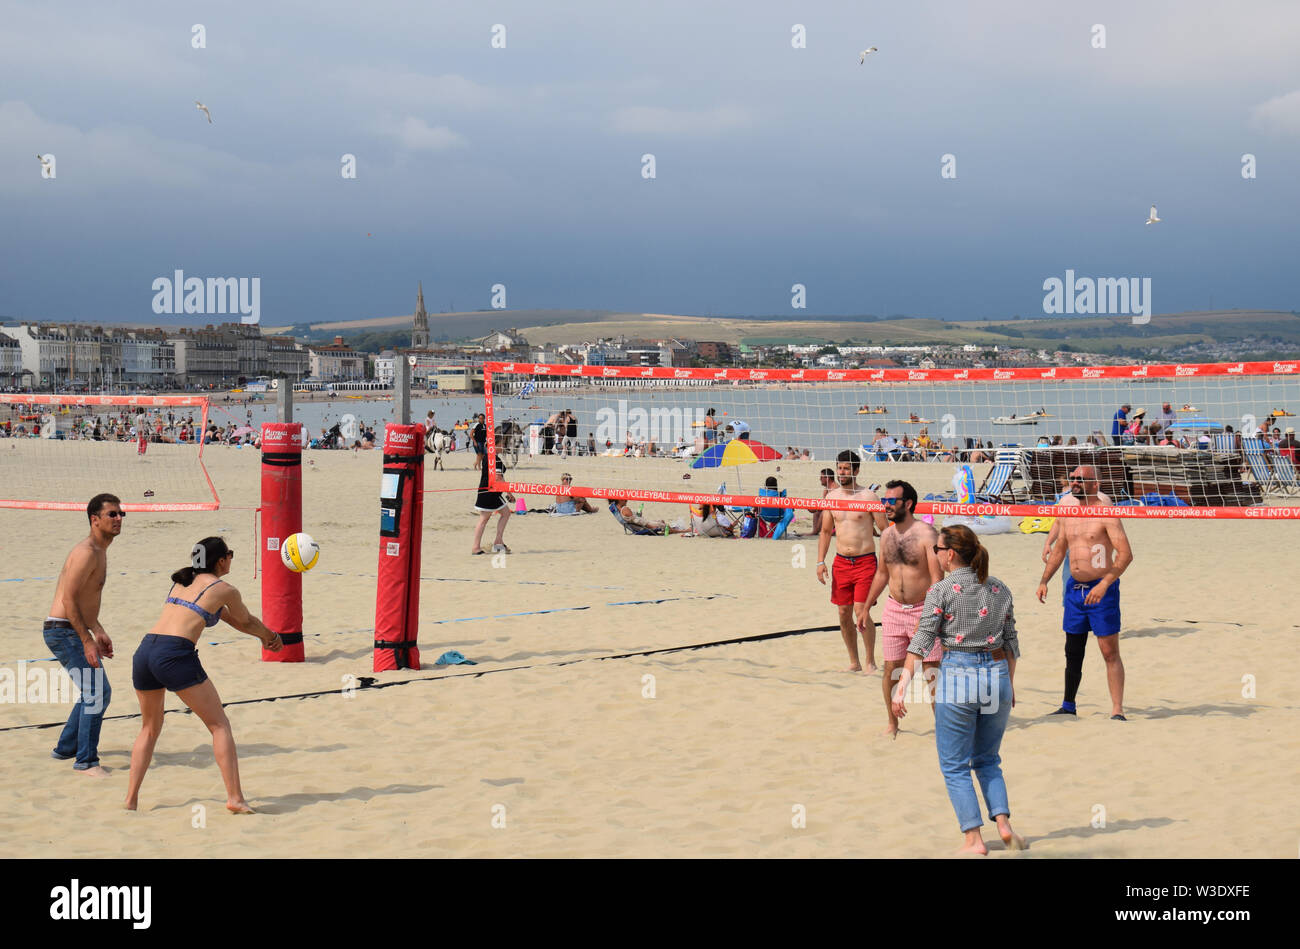 People playing beach volleyball in Summer on Weymouth Beach in the UK Stock Photo